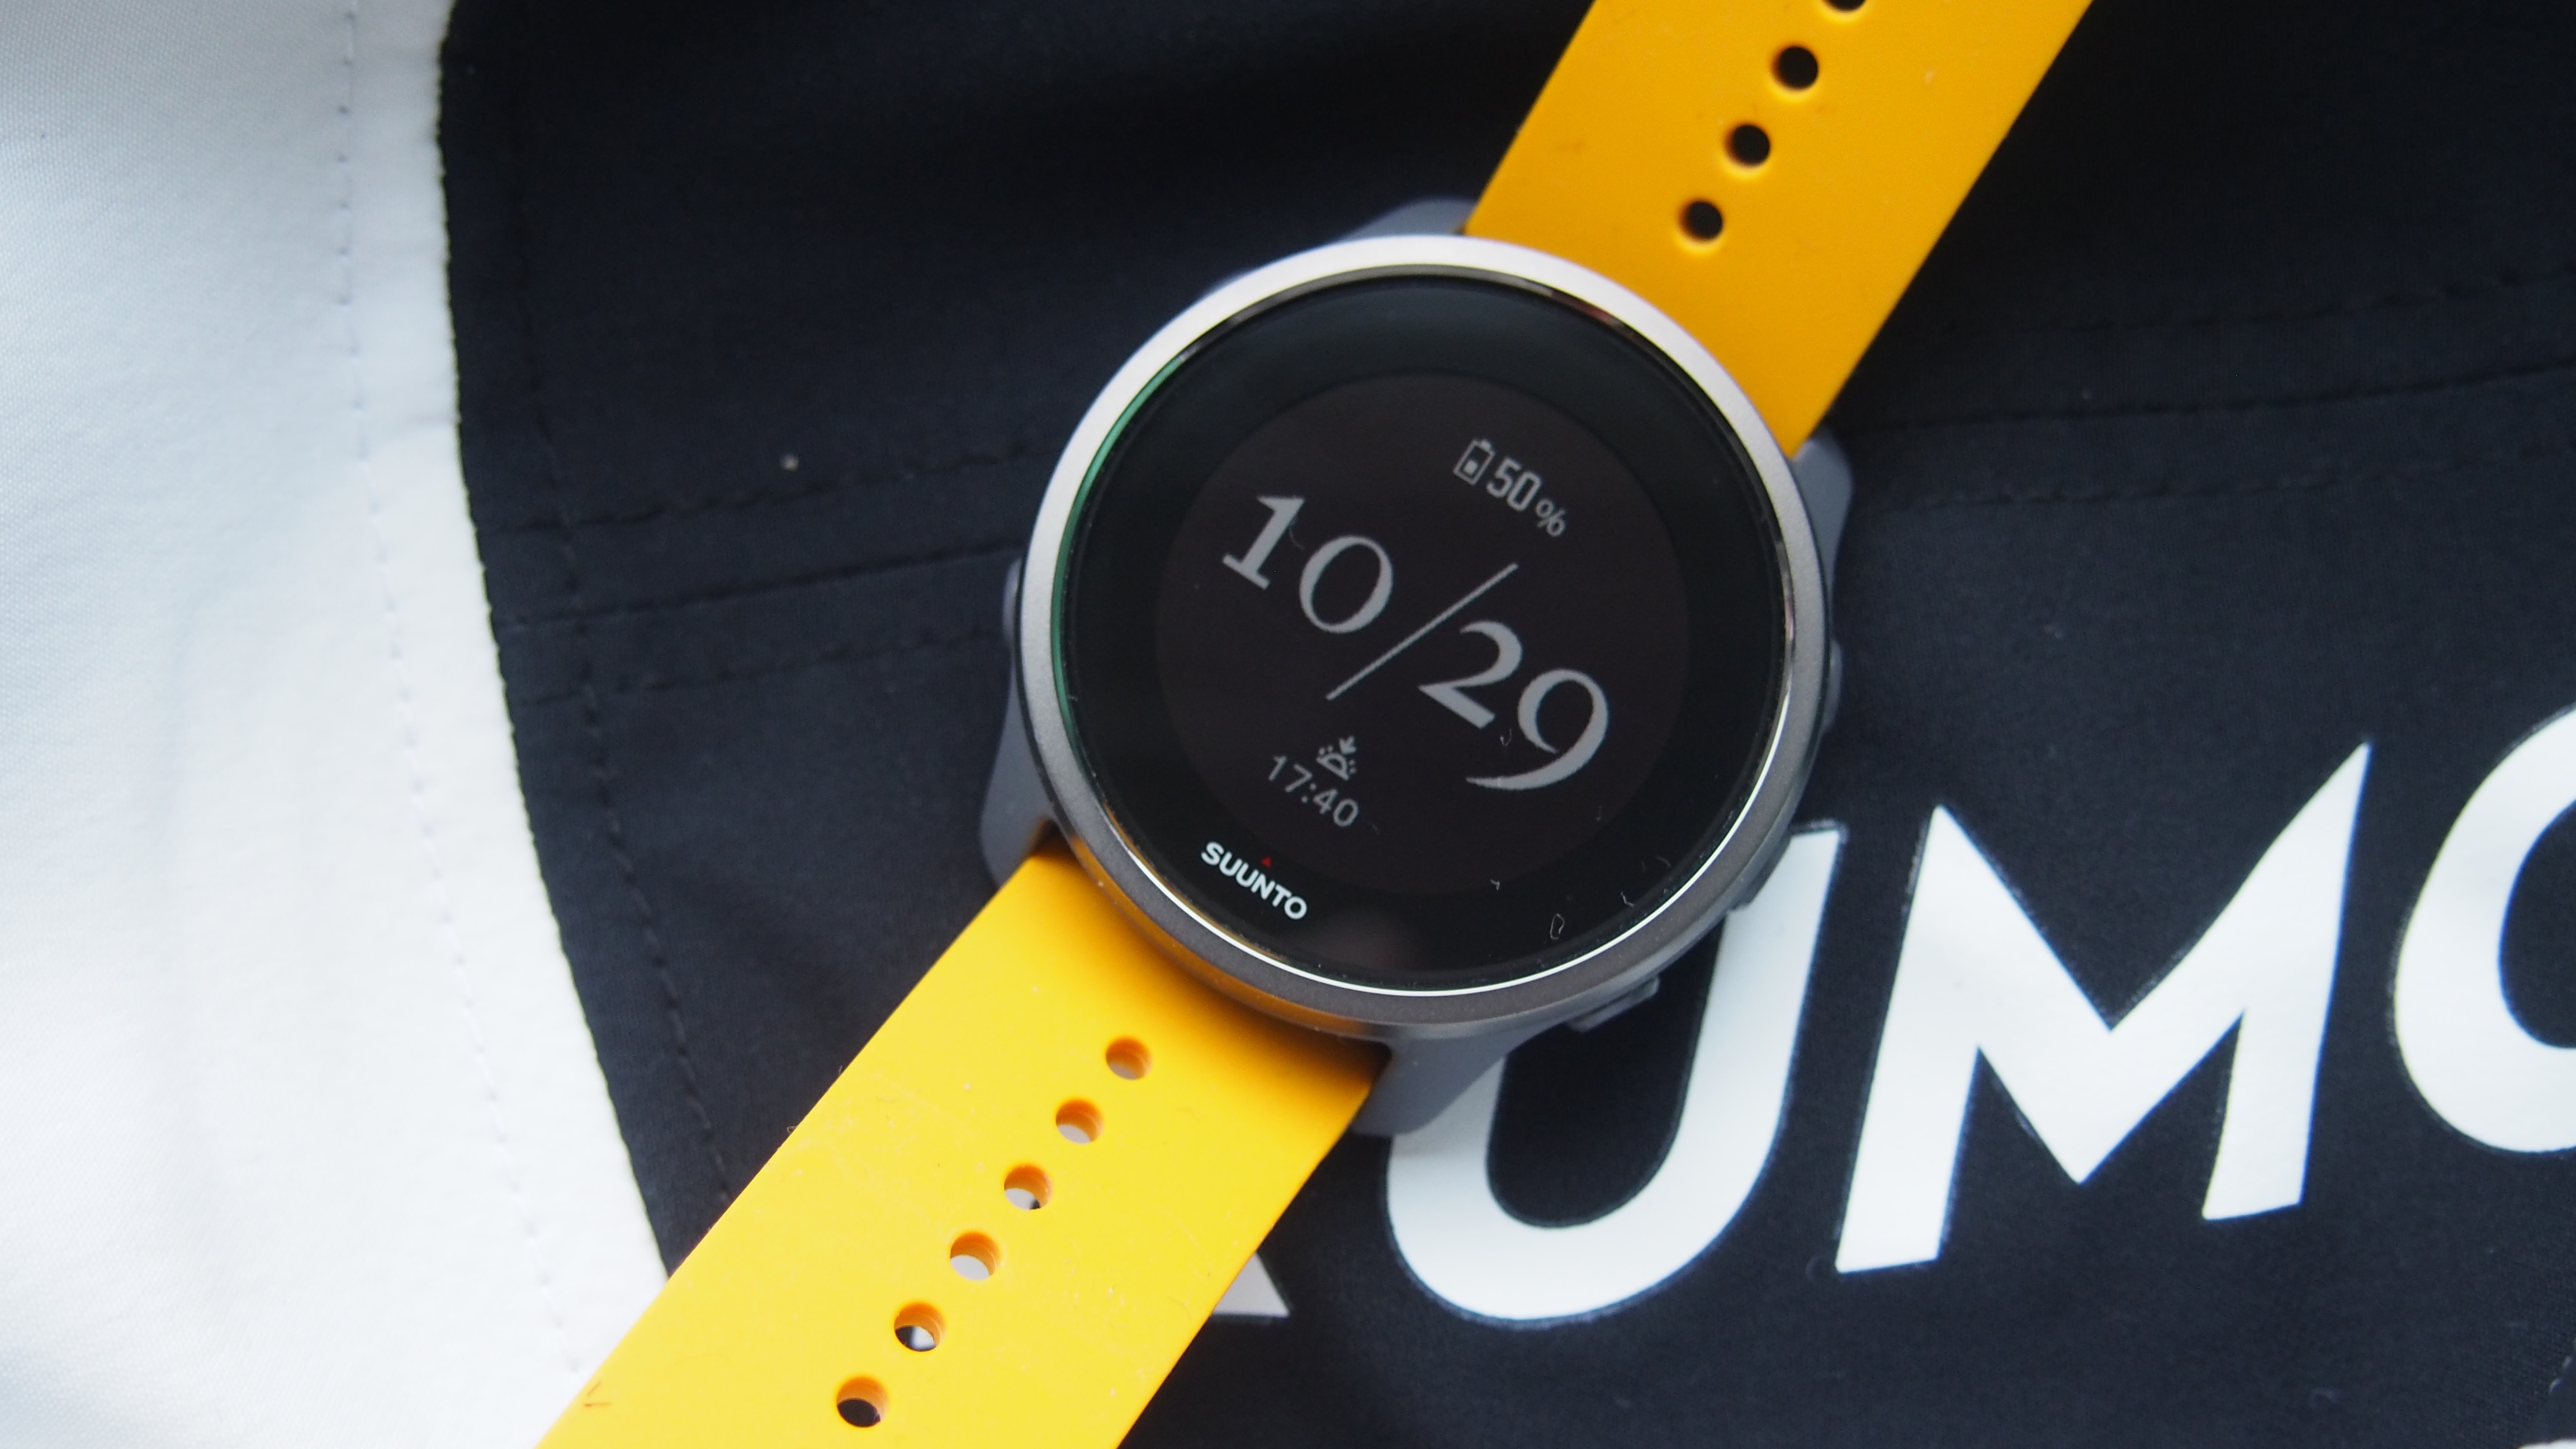 3 reasons why the Suunto 5 Peak might be the perfect budget GPS smartwatch